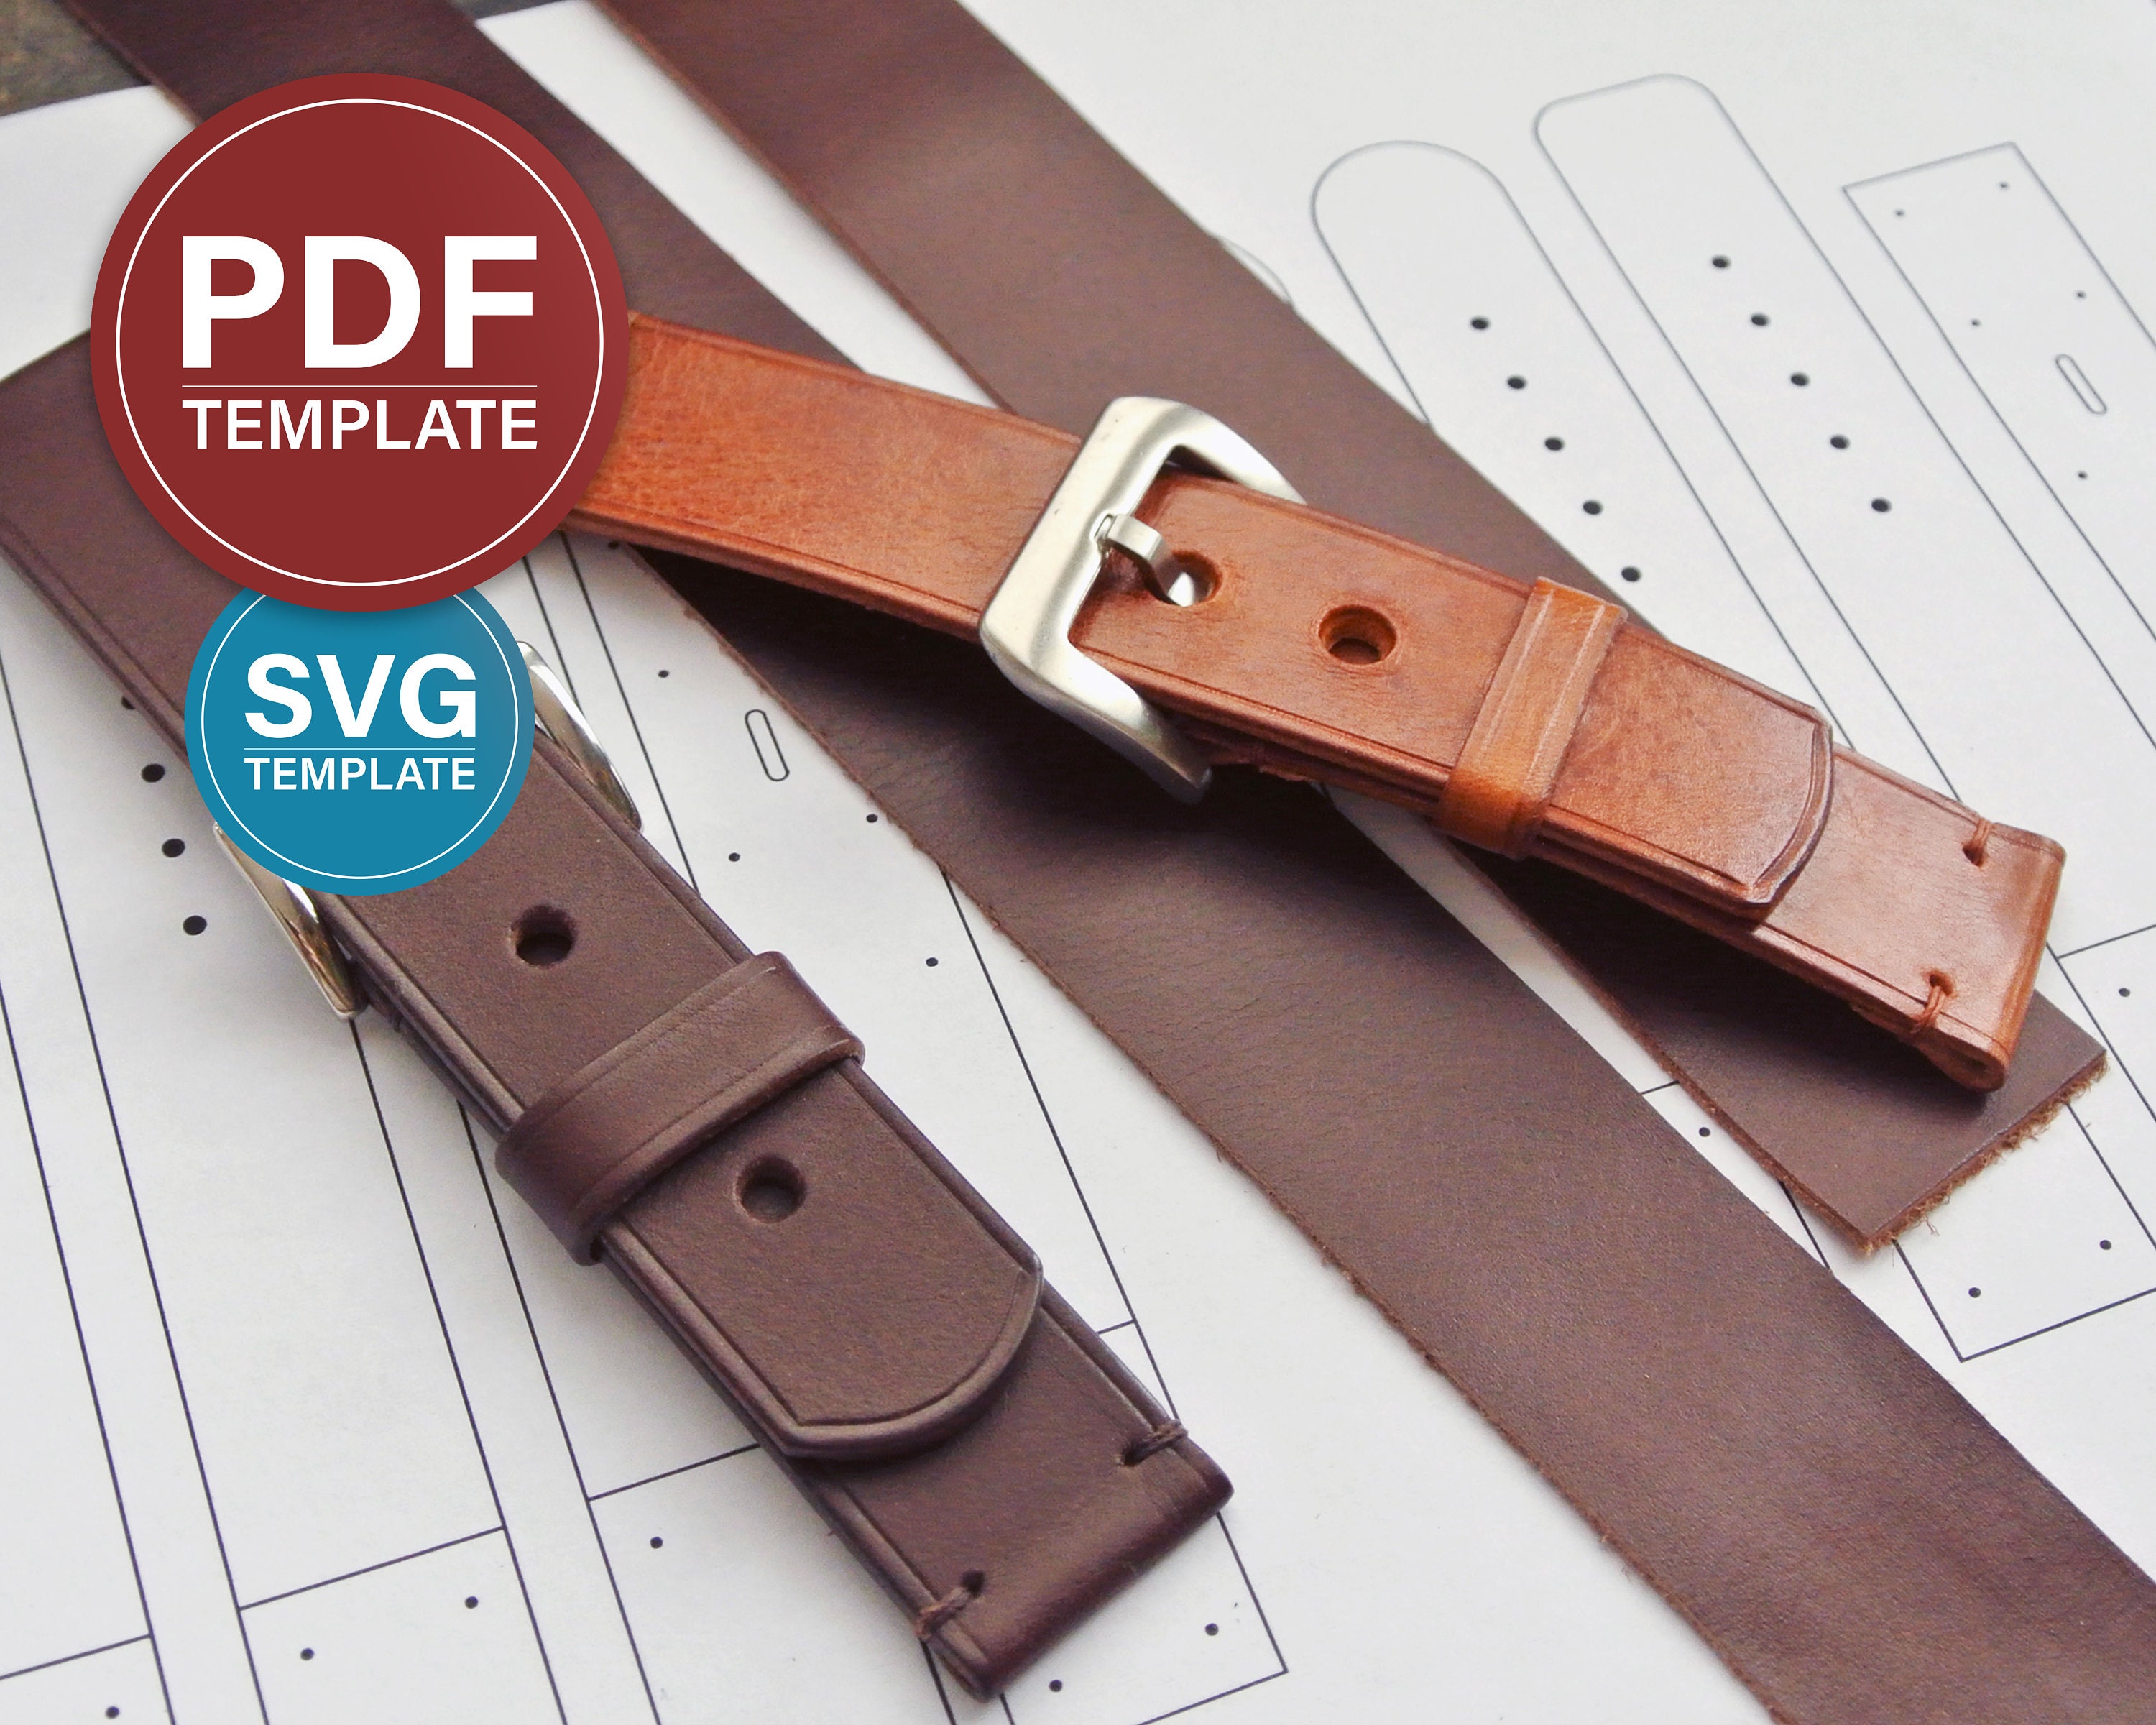 Hand-tooled leather watchband for under $4 – sue's news